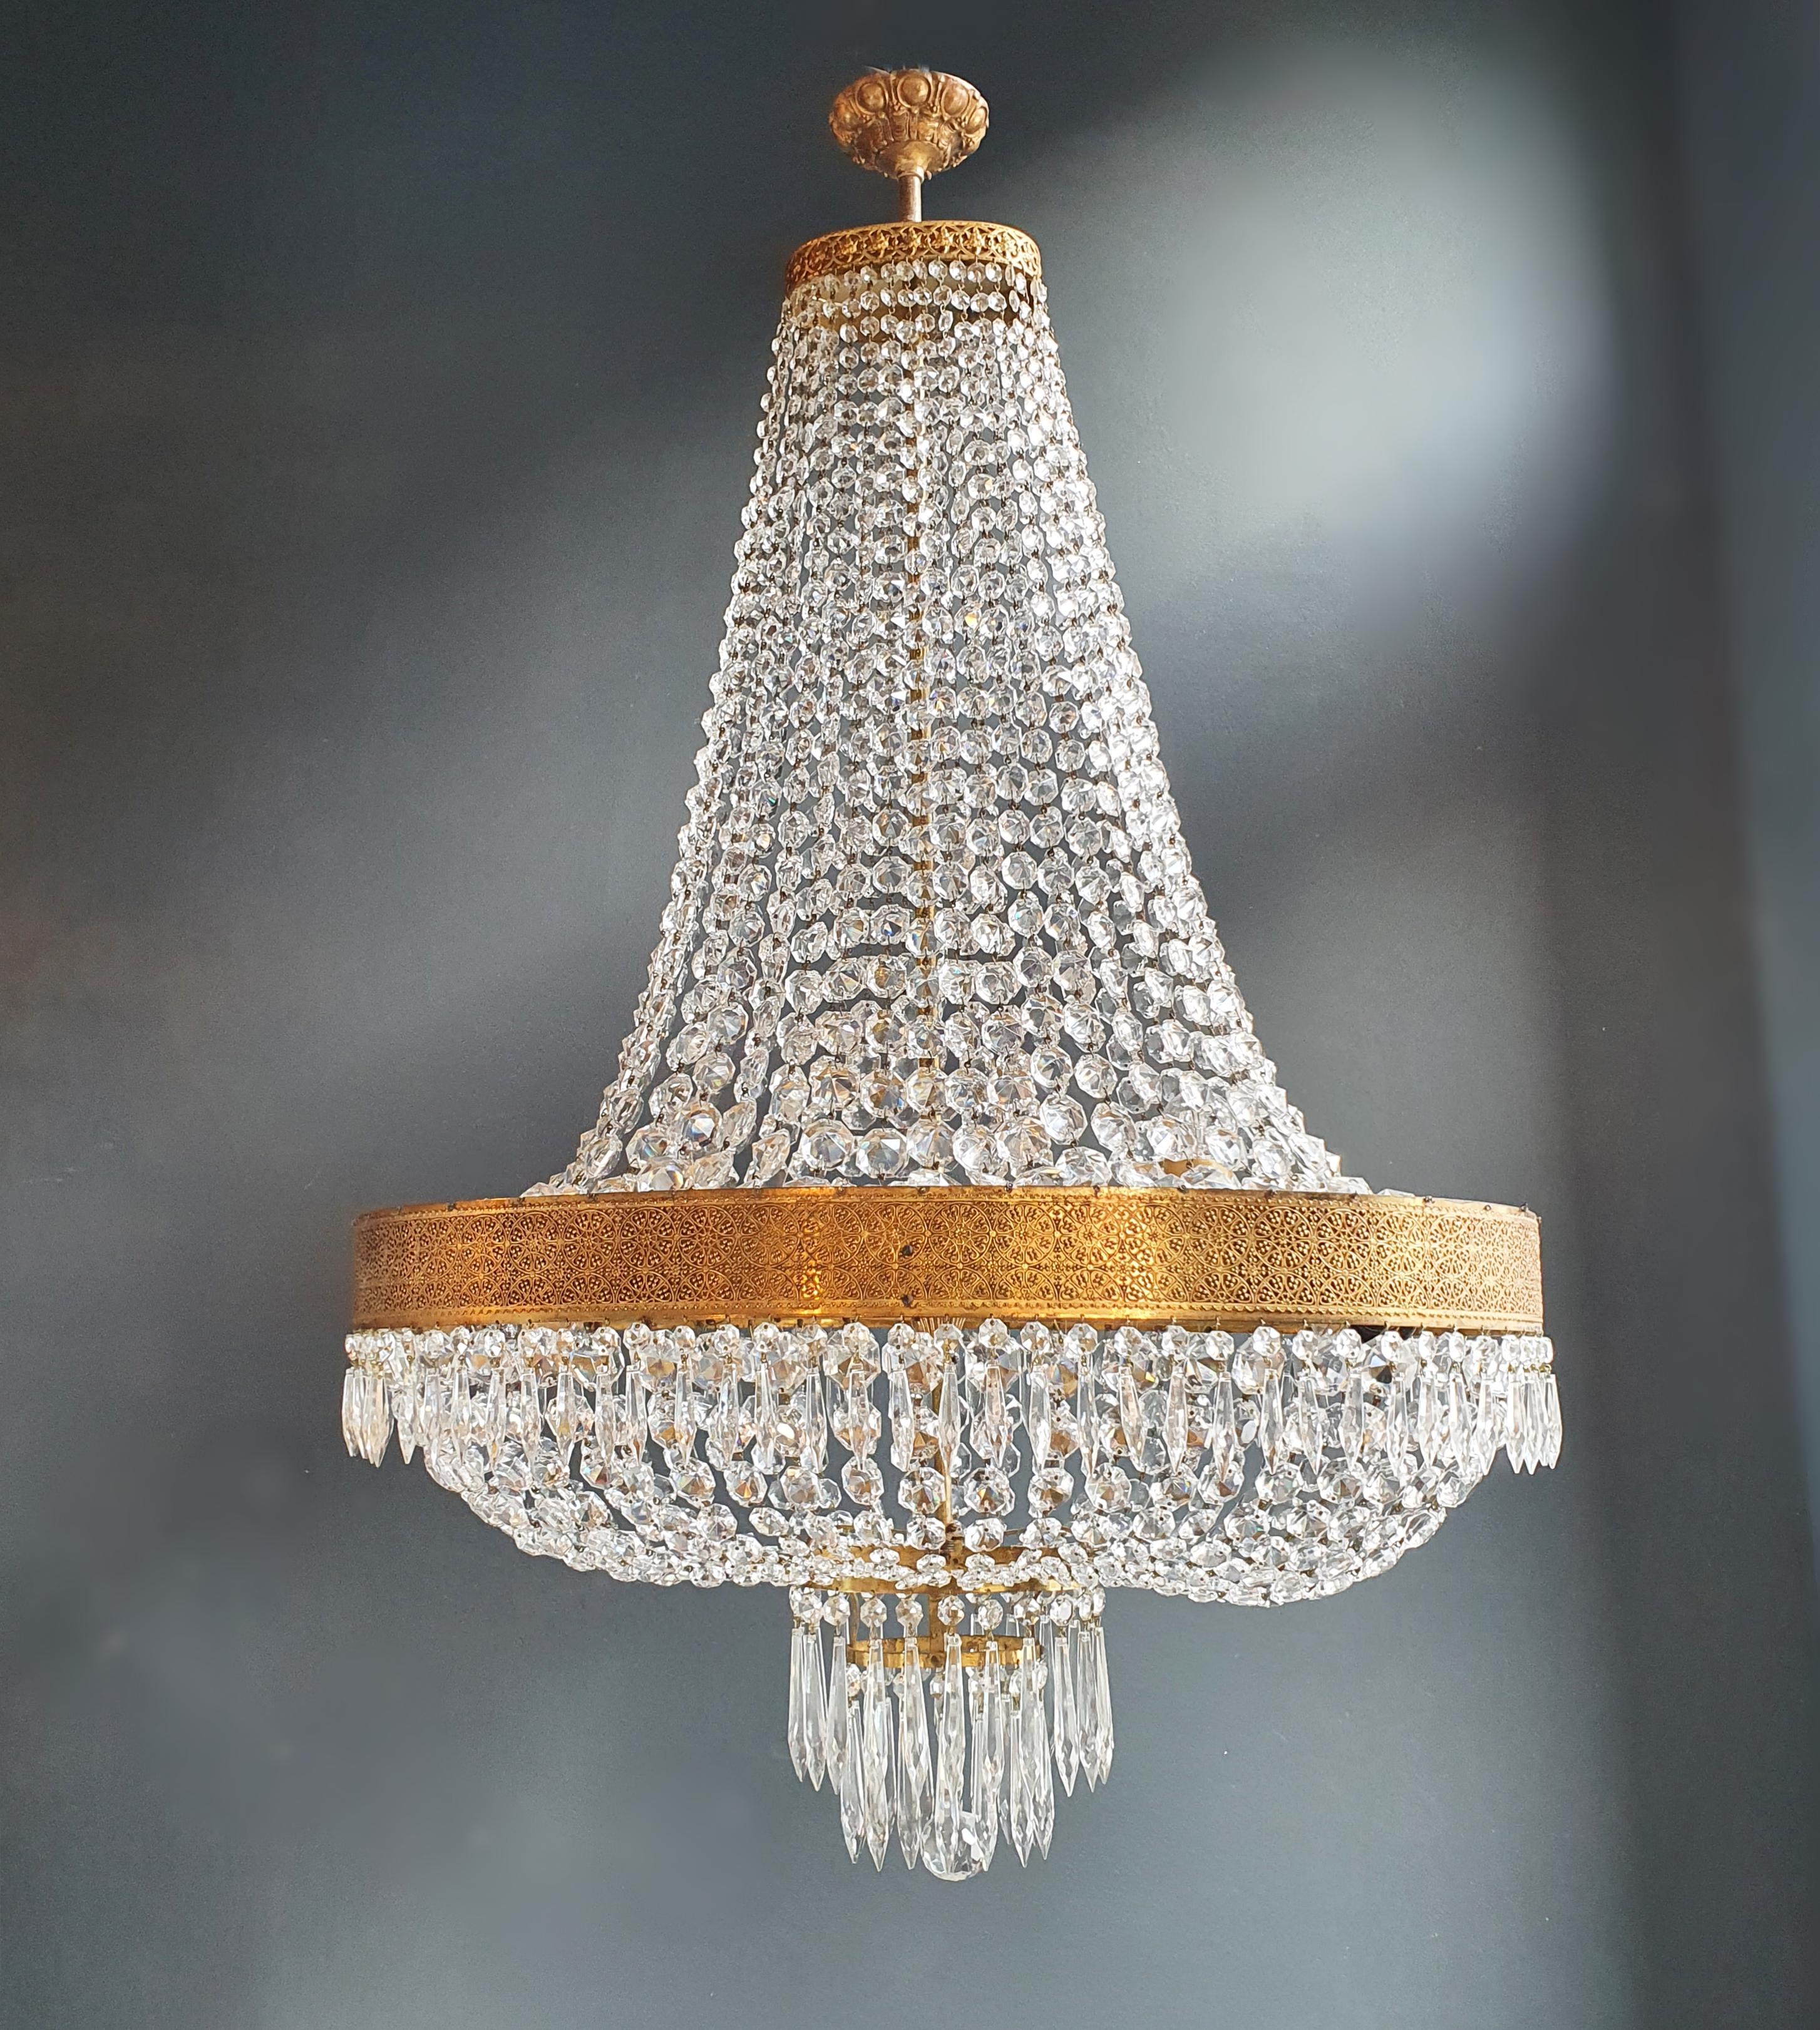 Oval Montgolfiè Empire Sac a Pearl Chandelier Crystal Lustre Ceiling Antique 2